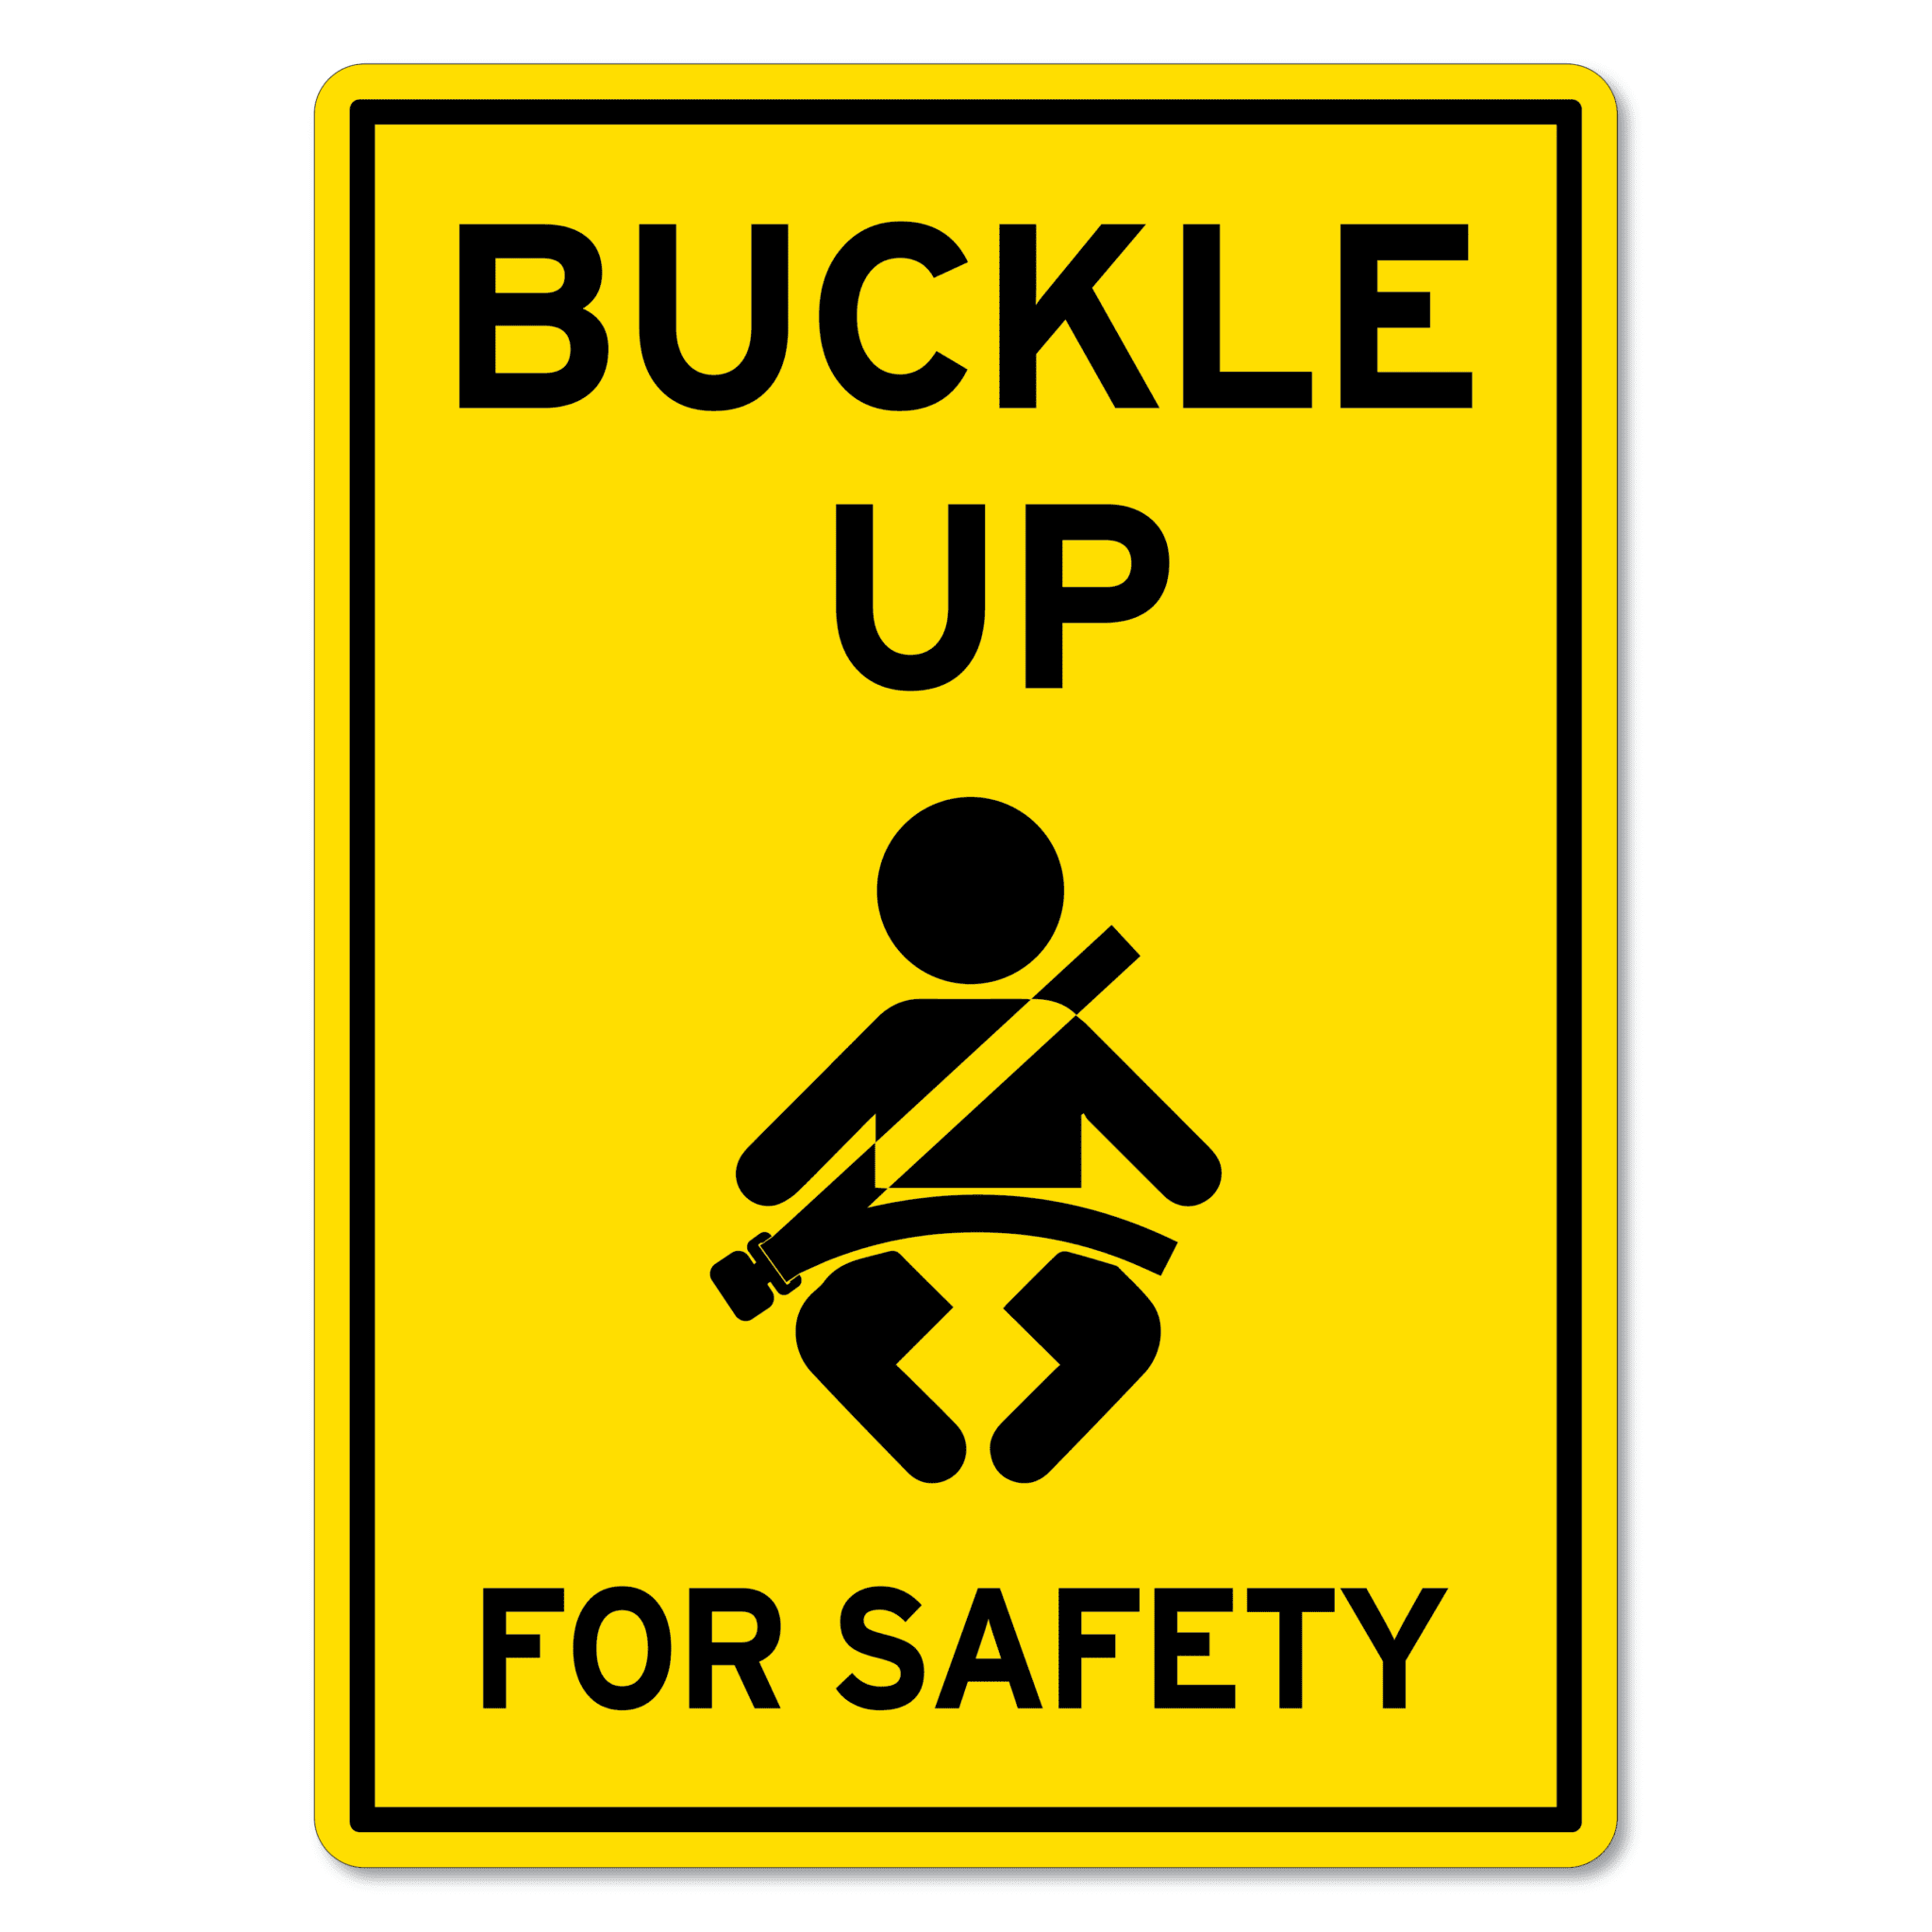 Buckle Your Truck Up: Factors That May Slacken Seat Belt Use – Association  for Psychological Science – APS